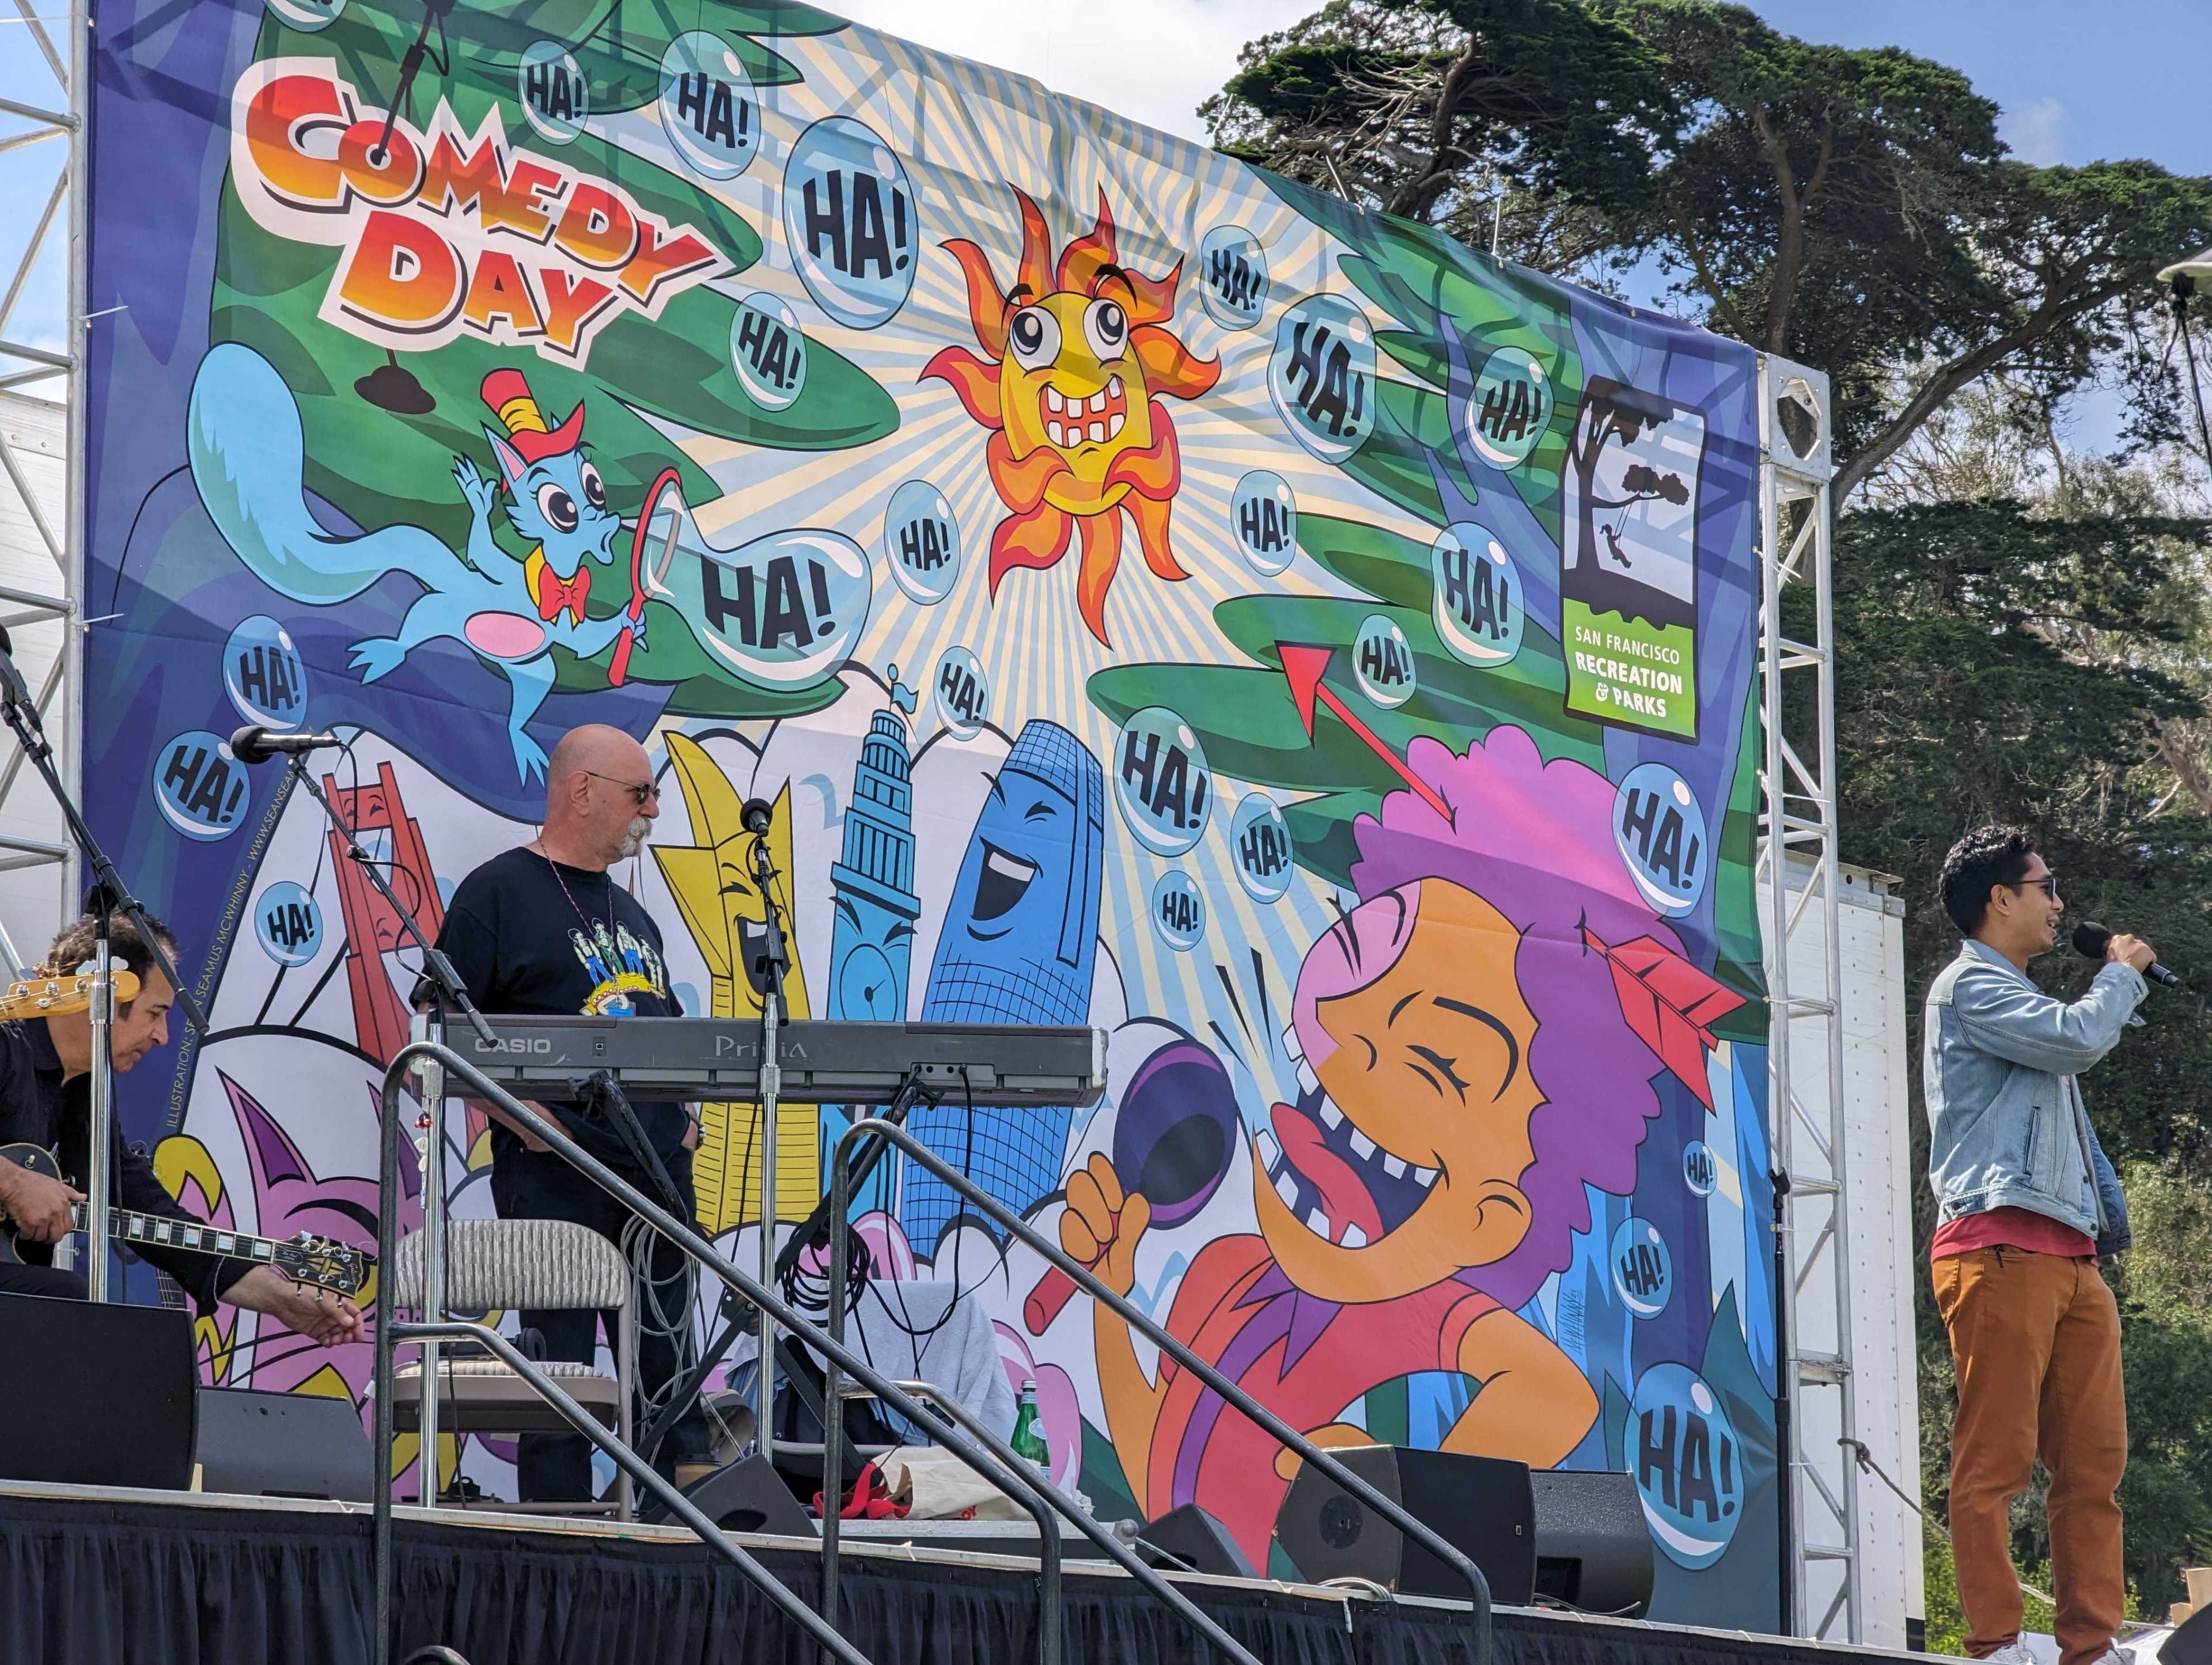 Comedian Leiroy Abueg cracks up the crowd Sunday at Golden Gate Park's Robin Williams Meadow during the Comedy Day in the Park festival